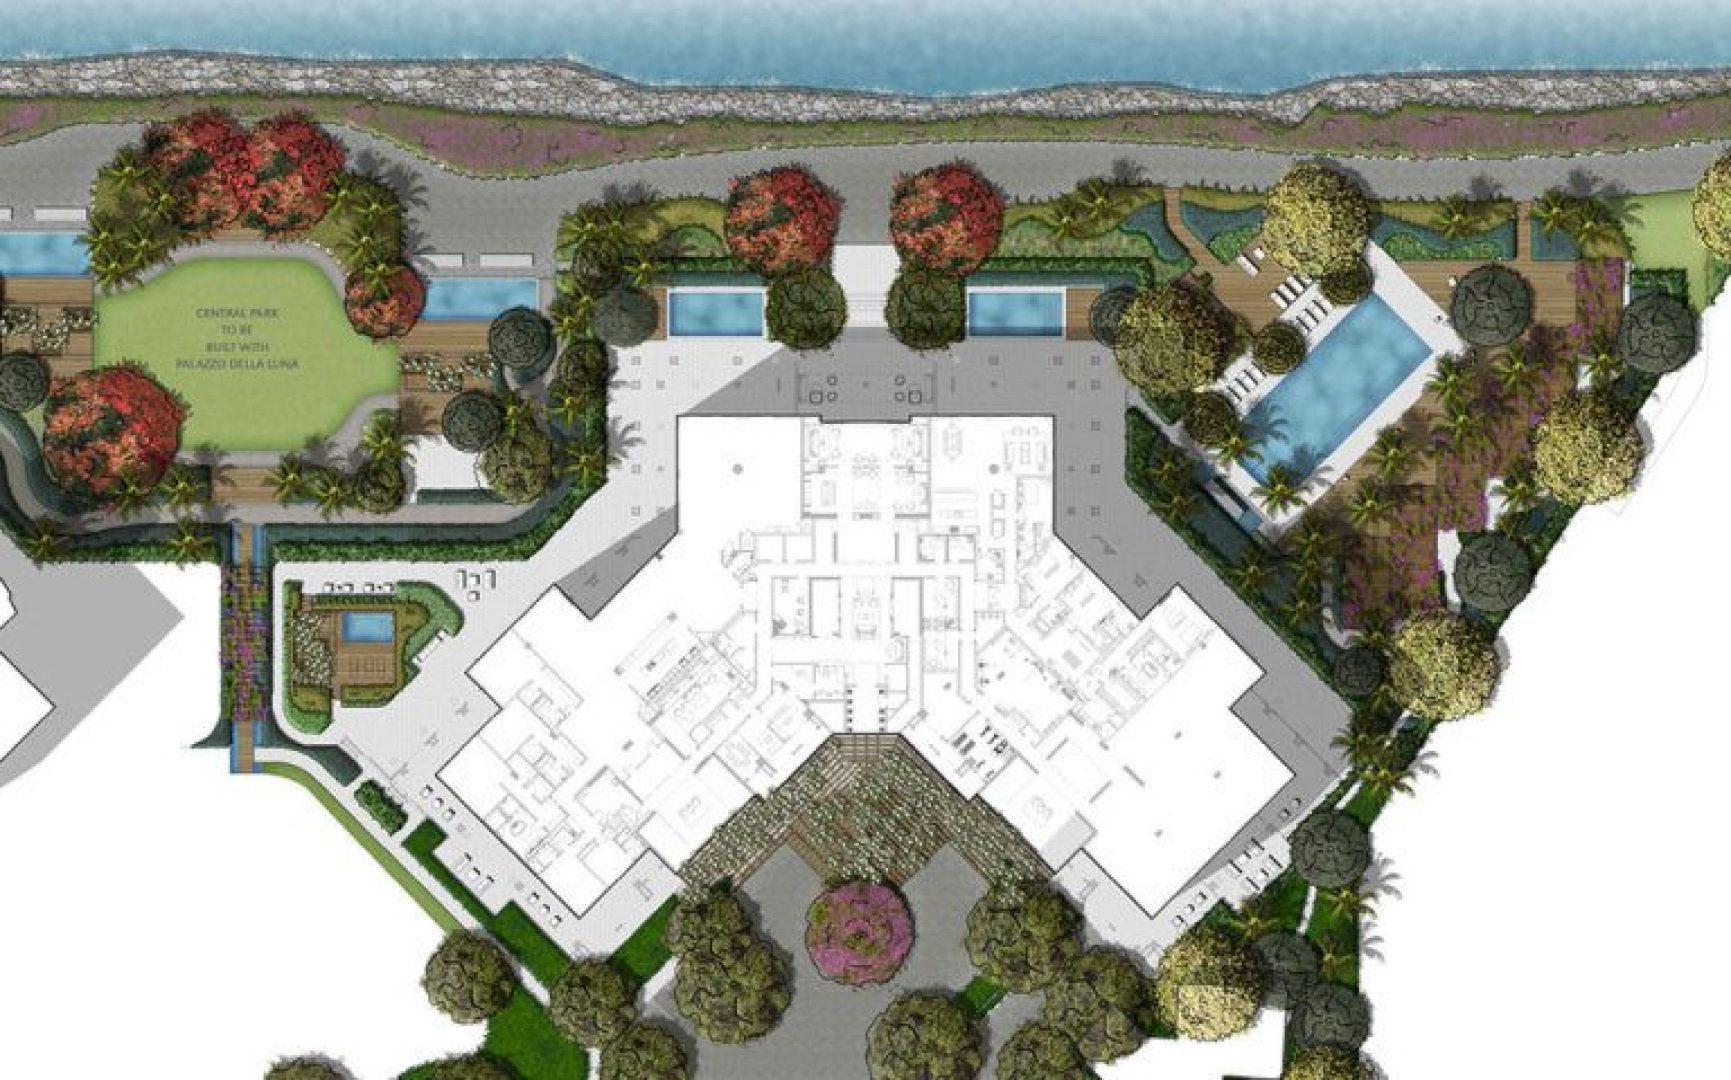 Siteplan for Palazzo del Sol, Luxury Waterfront Condominiums Located on Fisher Island, Miami Florida 33109